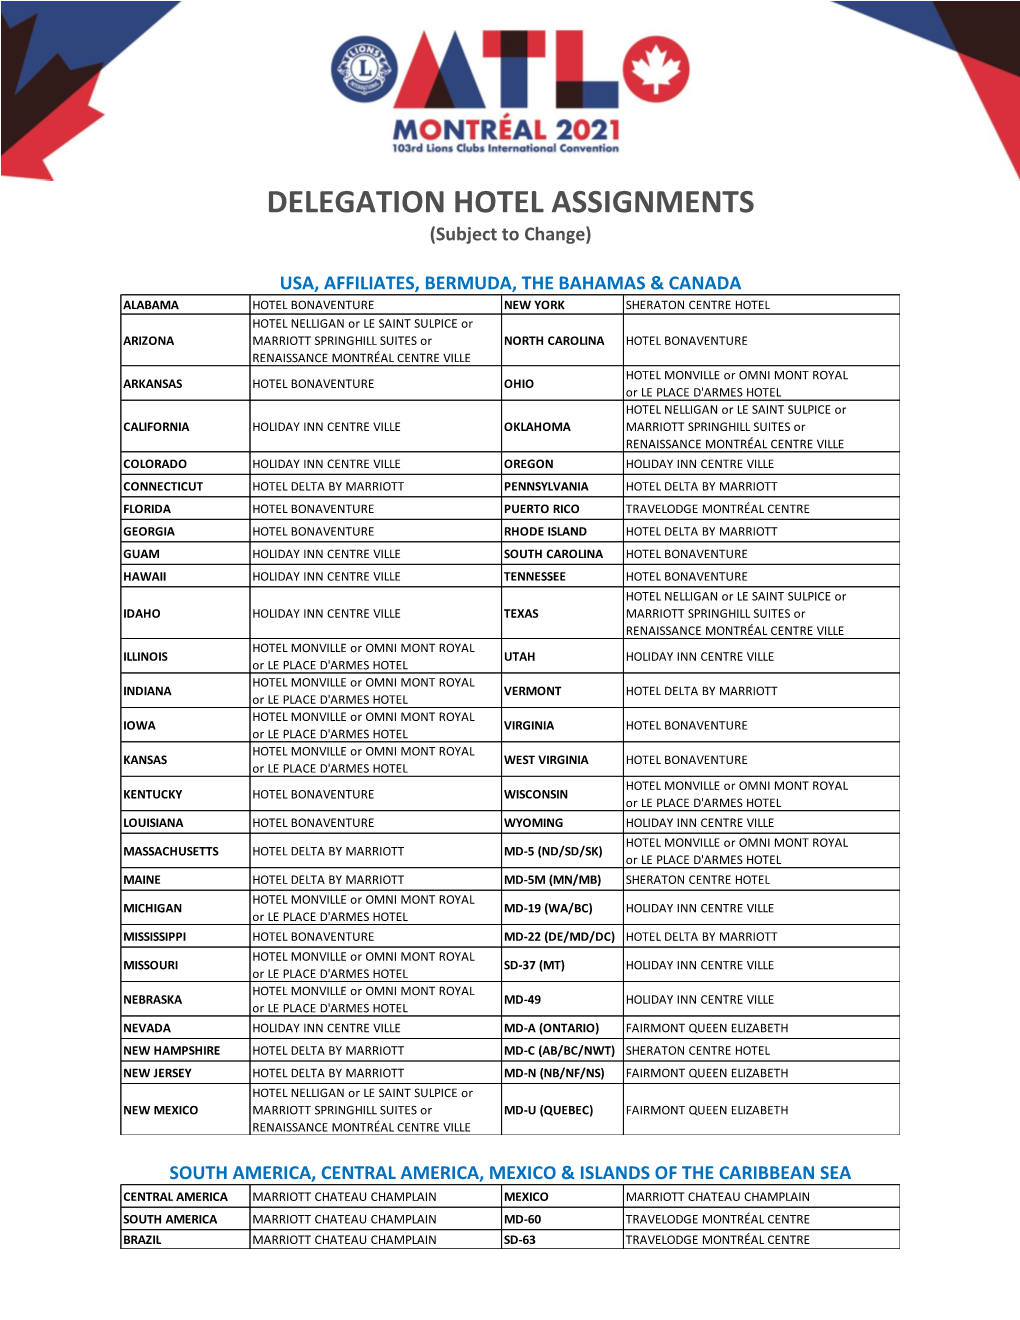 DELEGATION HOTEL ASSIGNMENTS (Subject to Change)